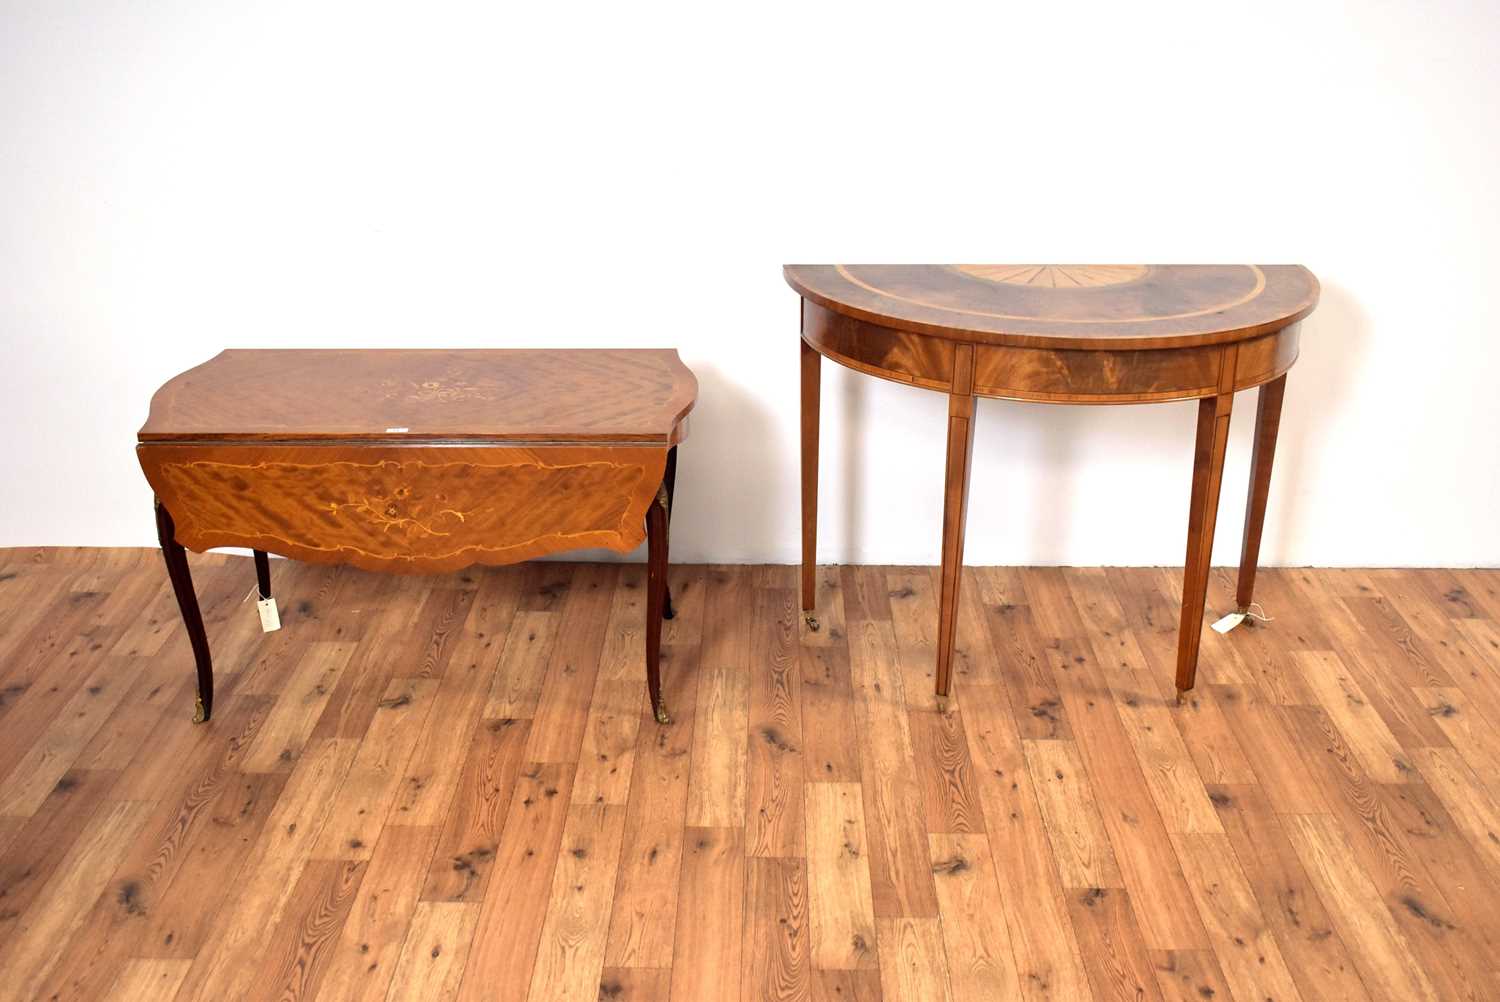 A Regency Revival demi lune inlaid mahogany hall table with a Regency Revival drop leaf table - Image 2 of 9